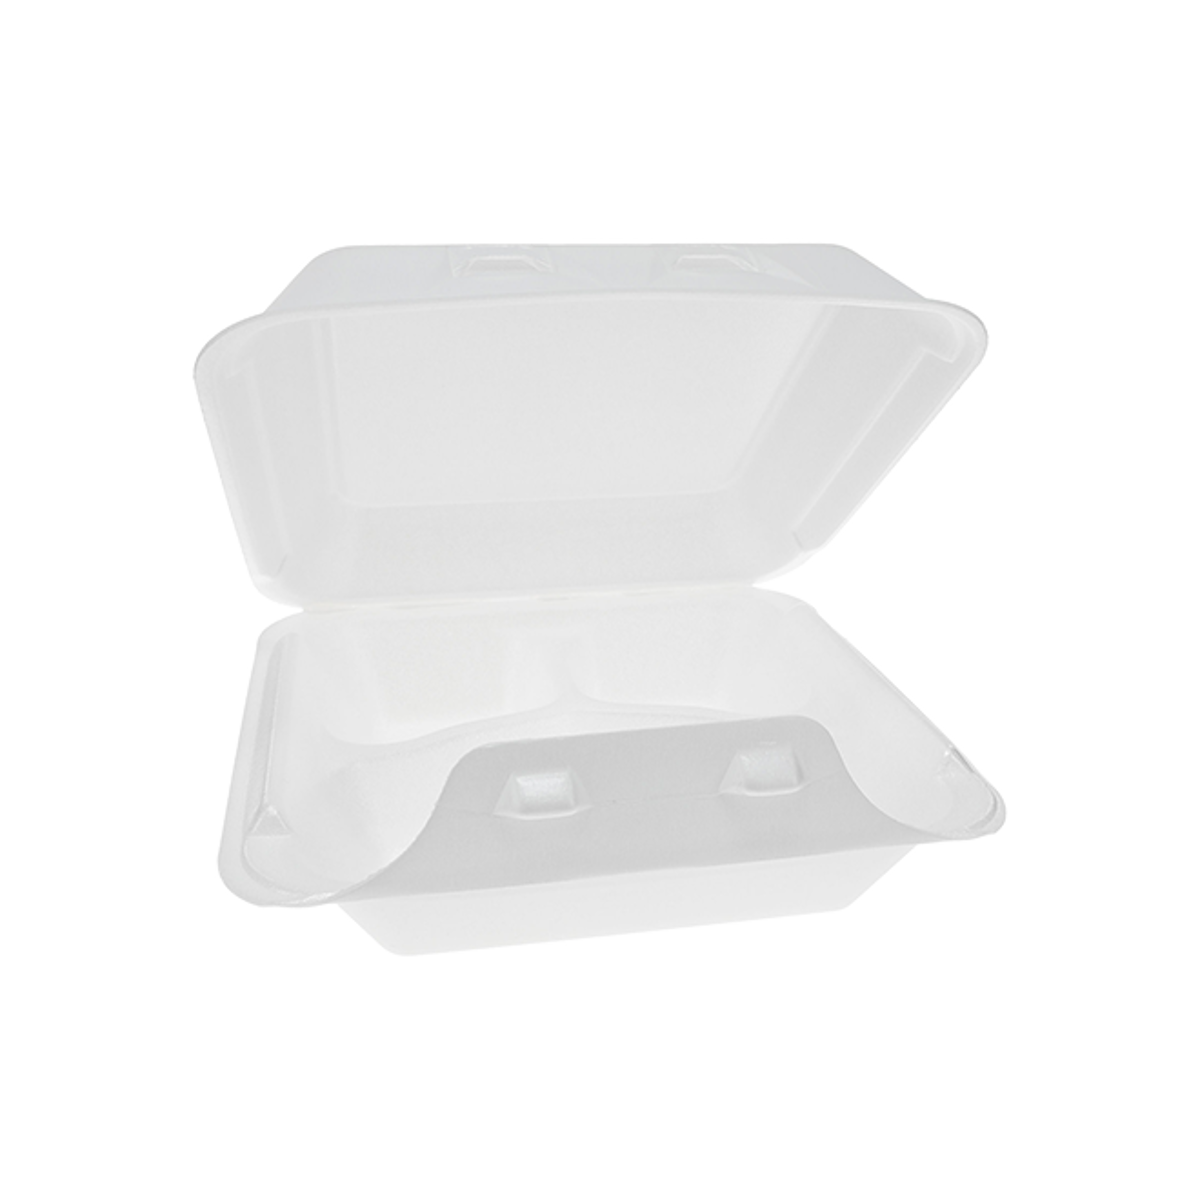 Pactiv YHLW08030000 SmartLock® Food Container 8 x 8.5 x 3